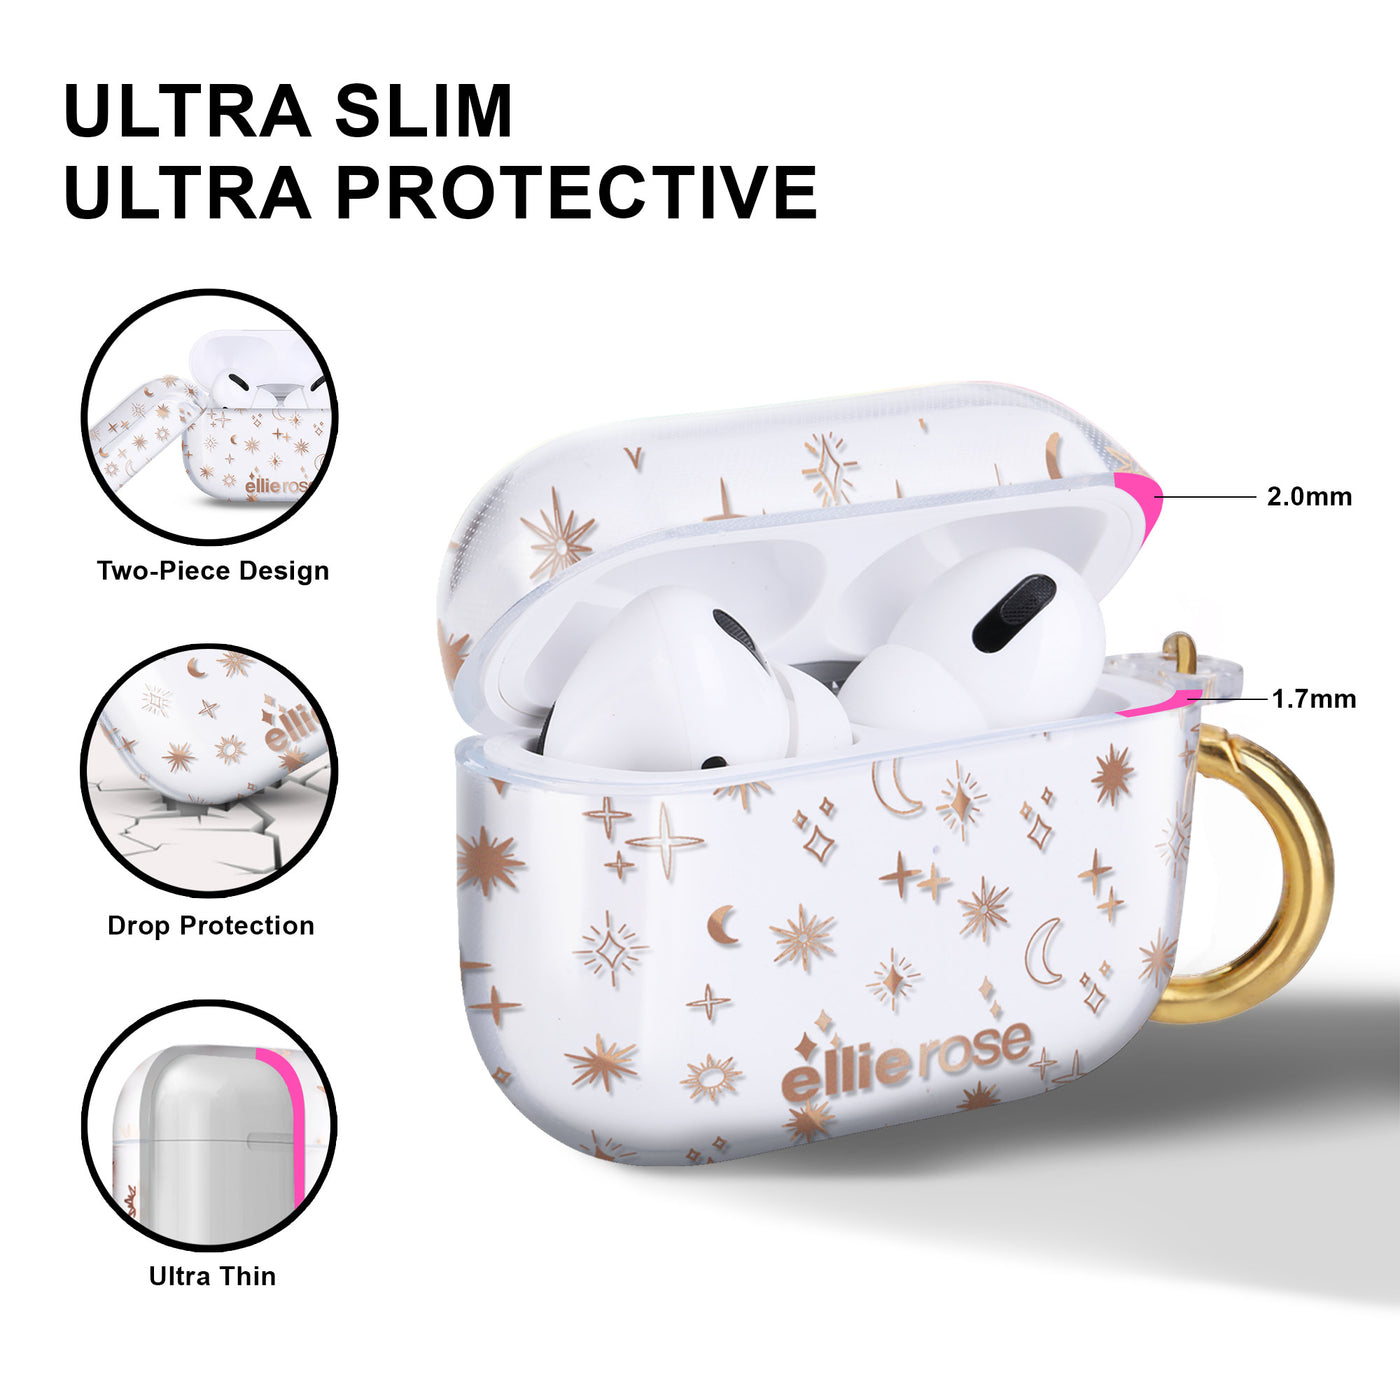 Two piece design, drop protection, ultra slim and ultra protective Starstruck Airpods Pro Case